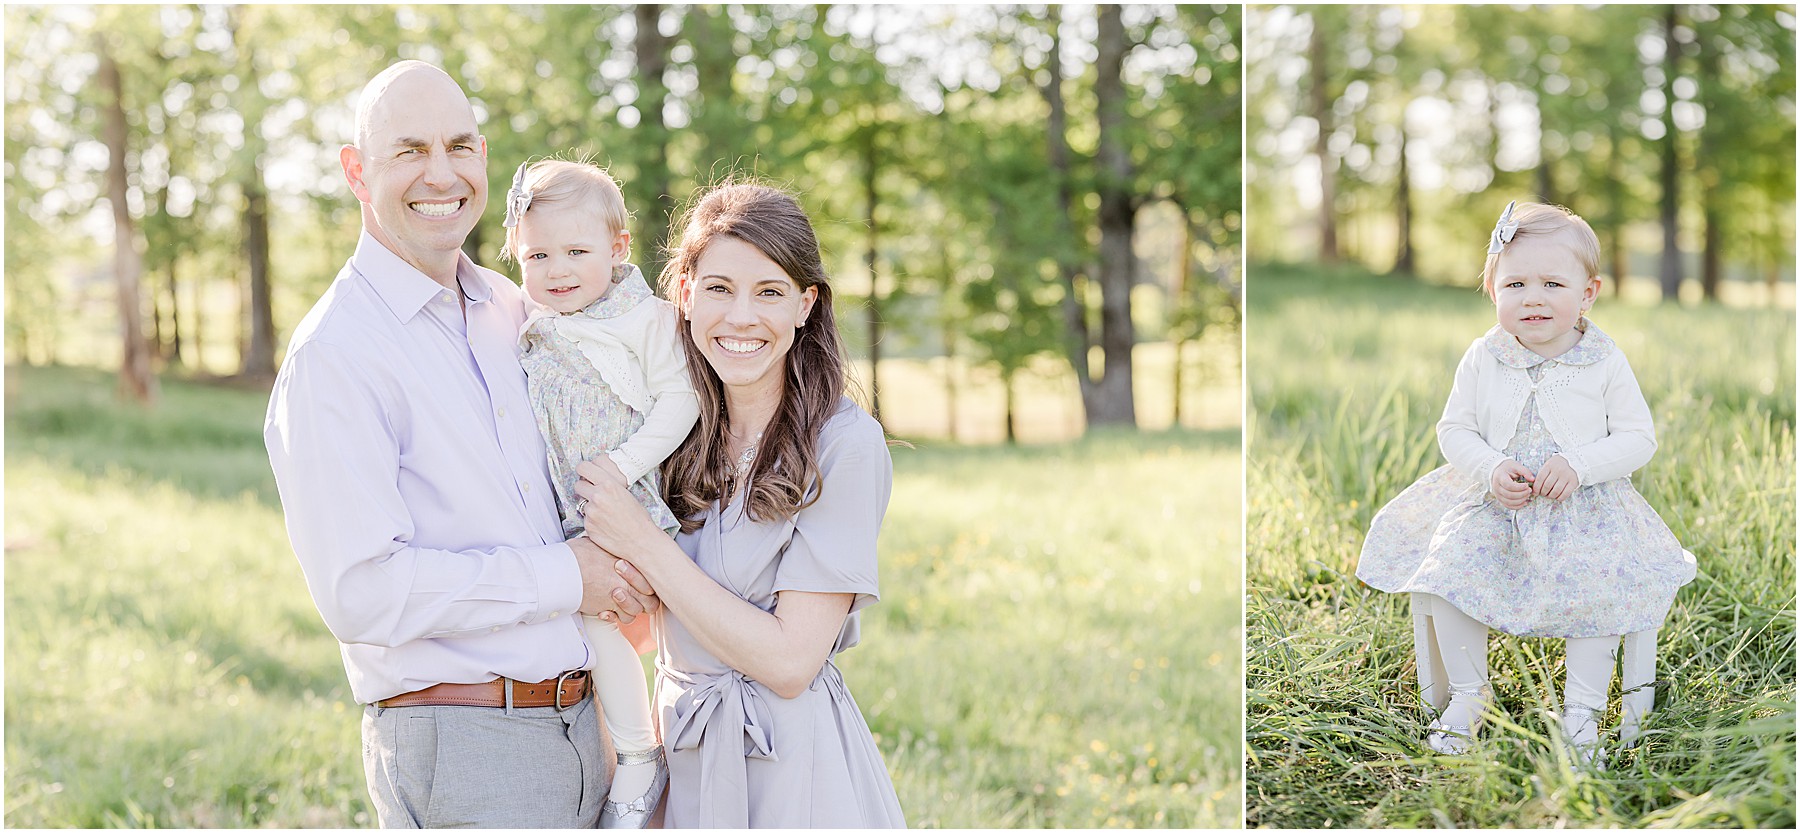 Family Portraits of Mother and Father with their toddler daughter in a grassy field.